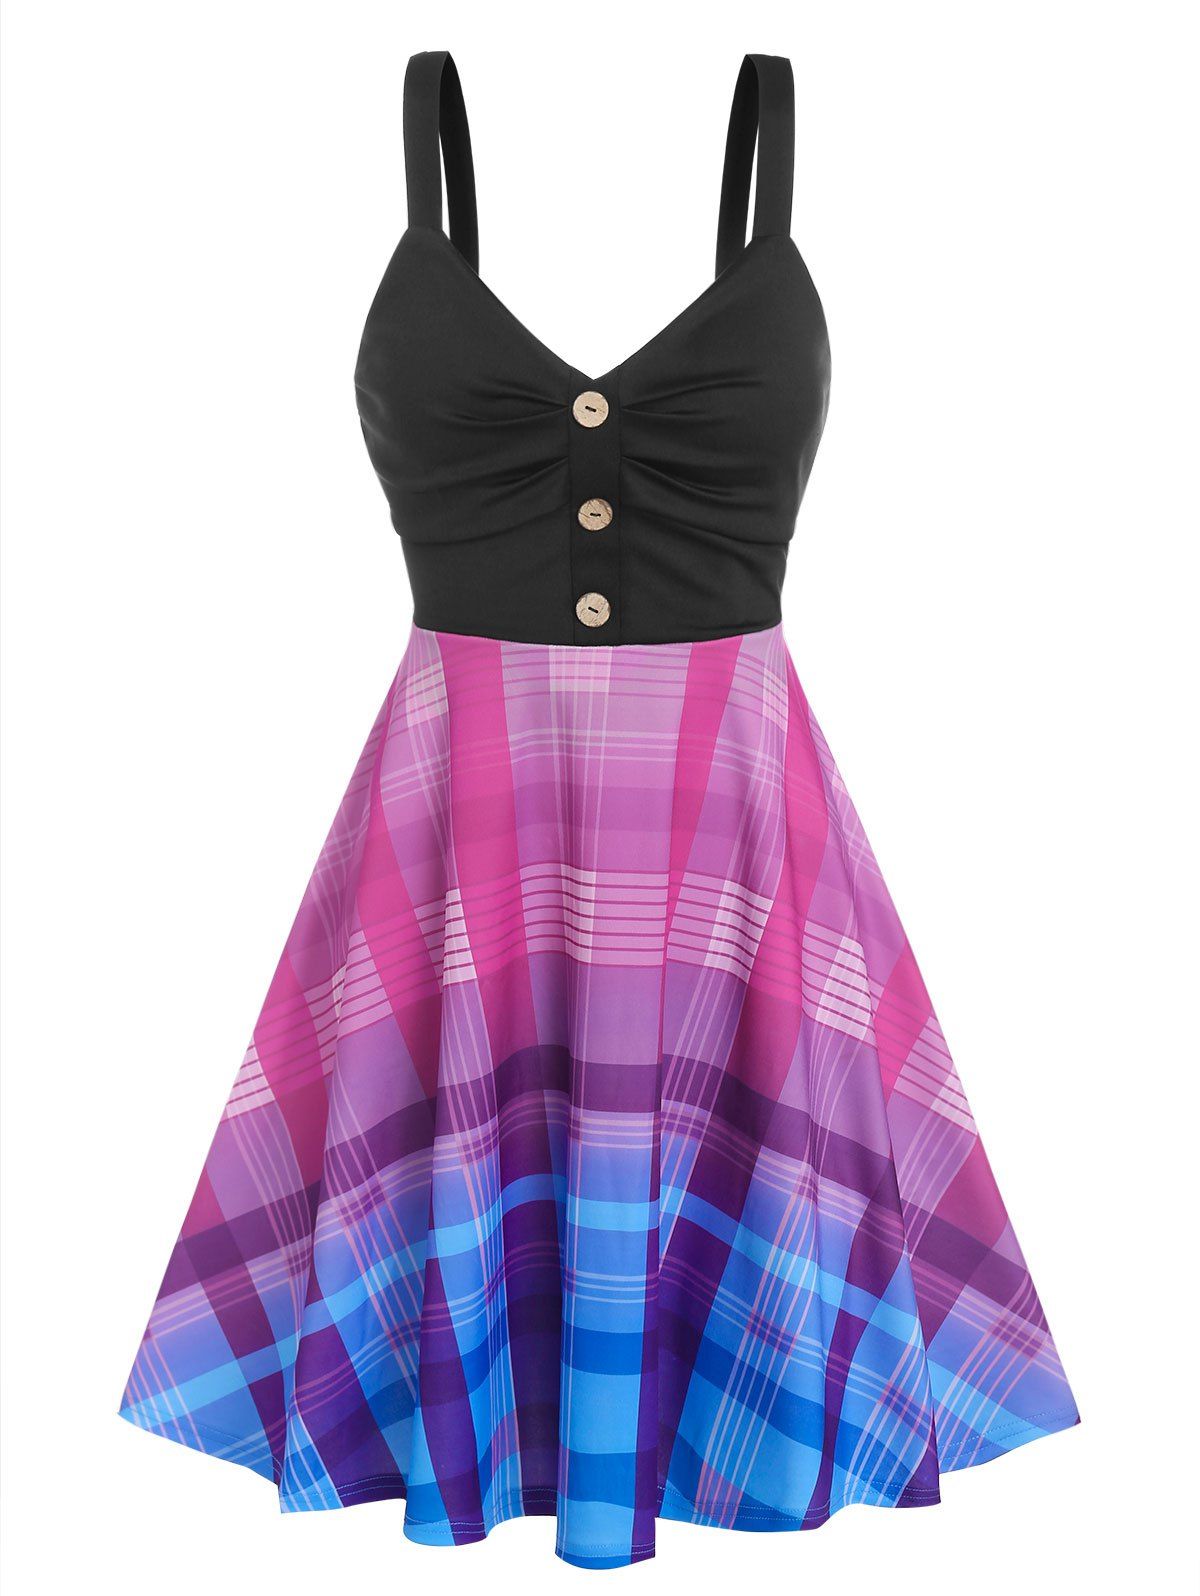 Ombre Color Plaid Ruched Fit and Flare Dress - multicolor XXXL